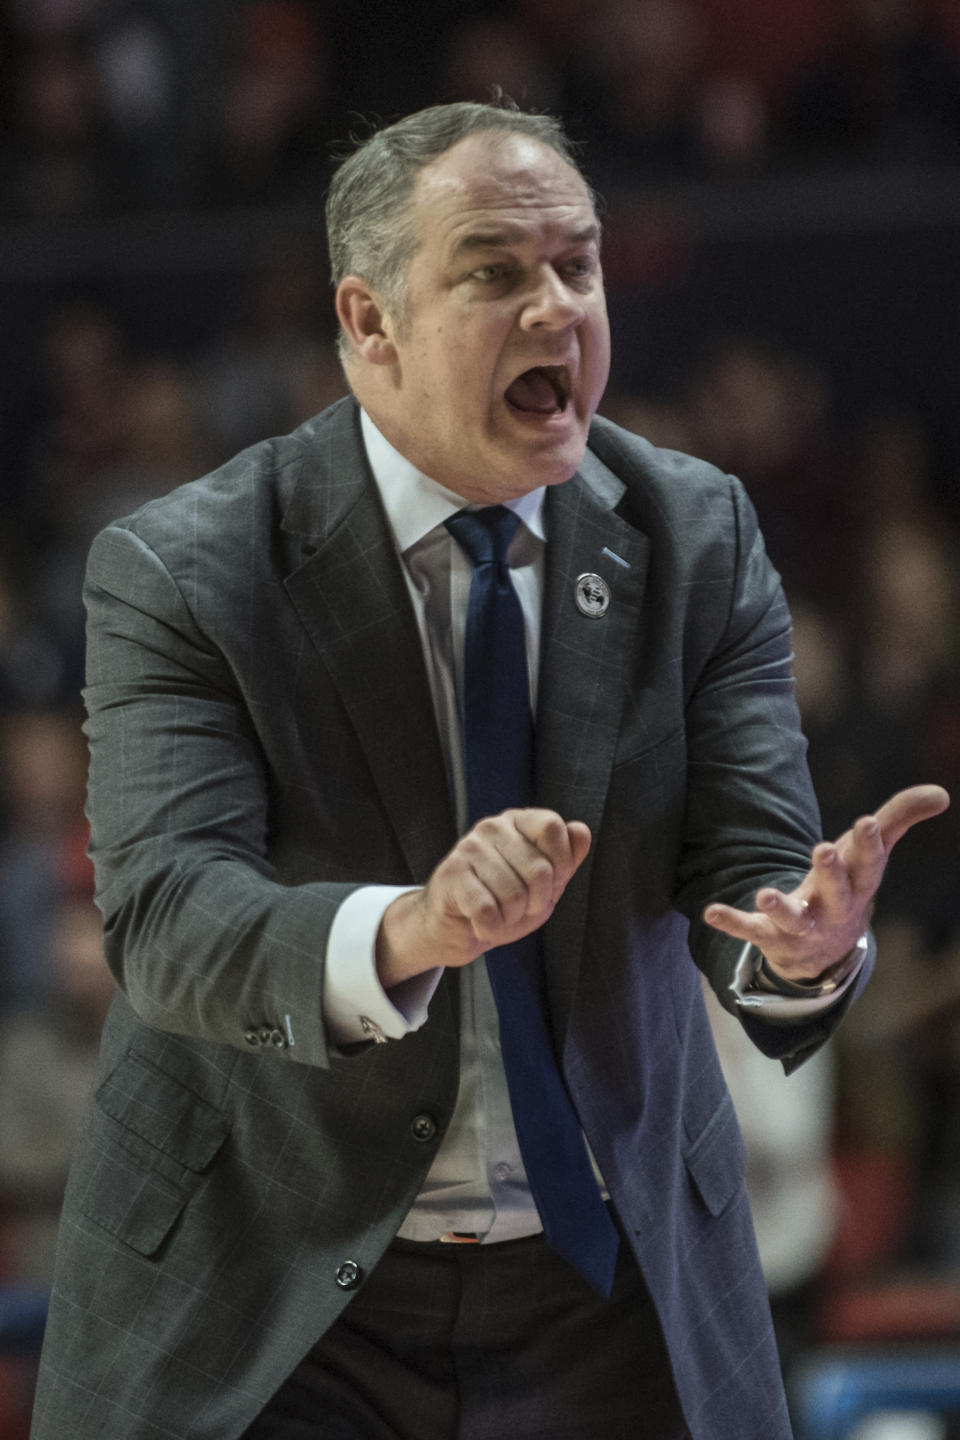 Rutgers head coach Steve Pikiell fires his team up against Illinois in the second half of an NCAA college basketball game, Sunday, Jan. 11, 2020, in Champaign, Ill. (AP Photo/Holly Hart)